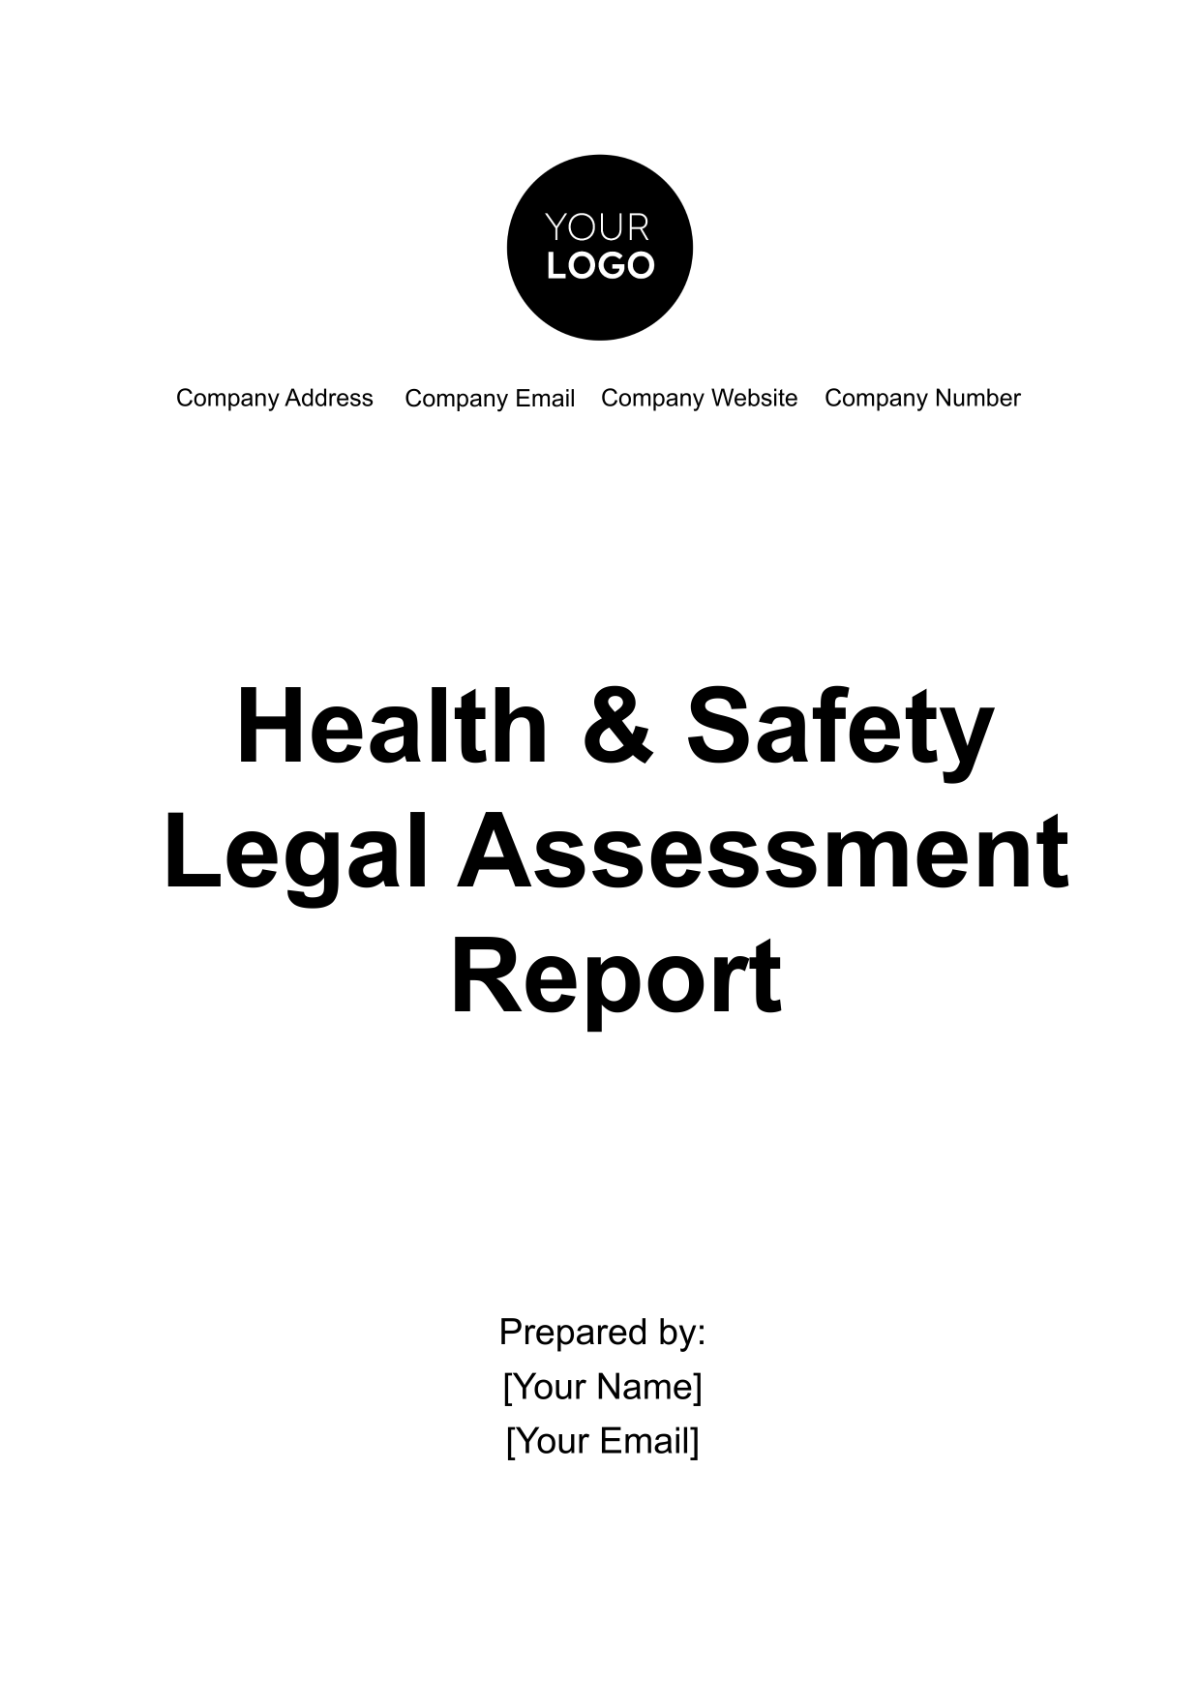 Health & Safety Legal Assessment Report Template